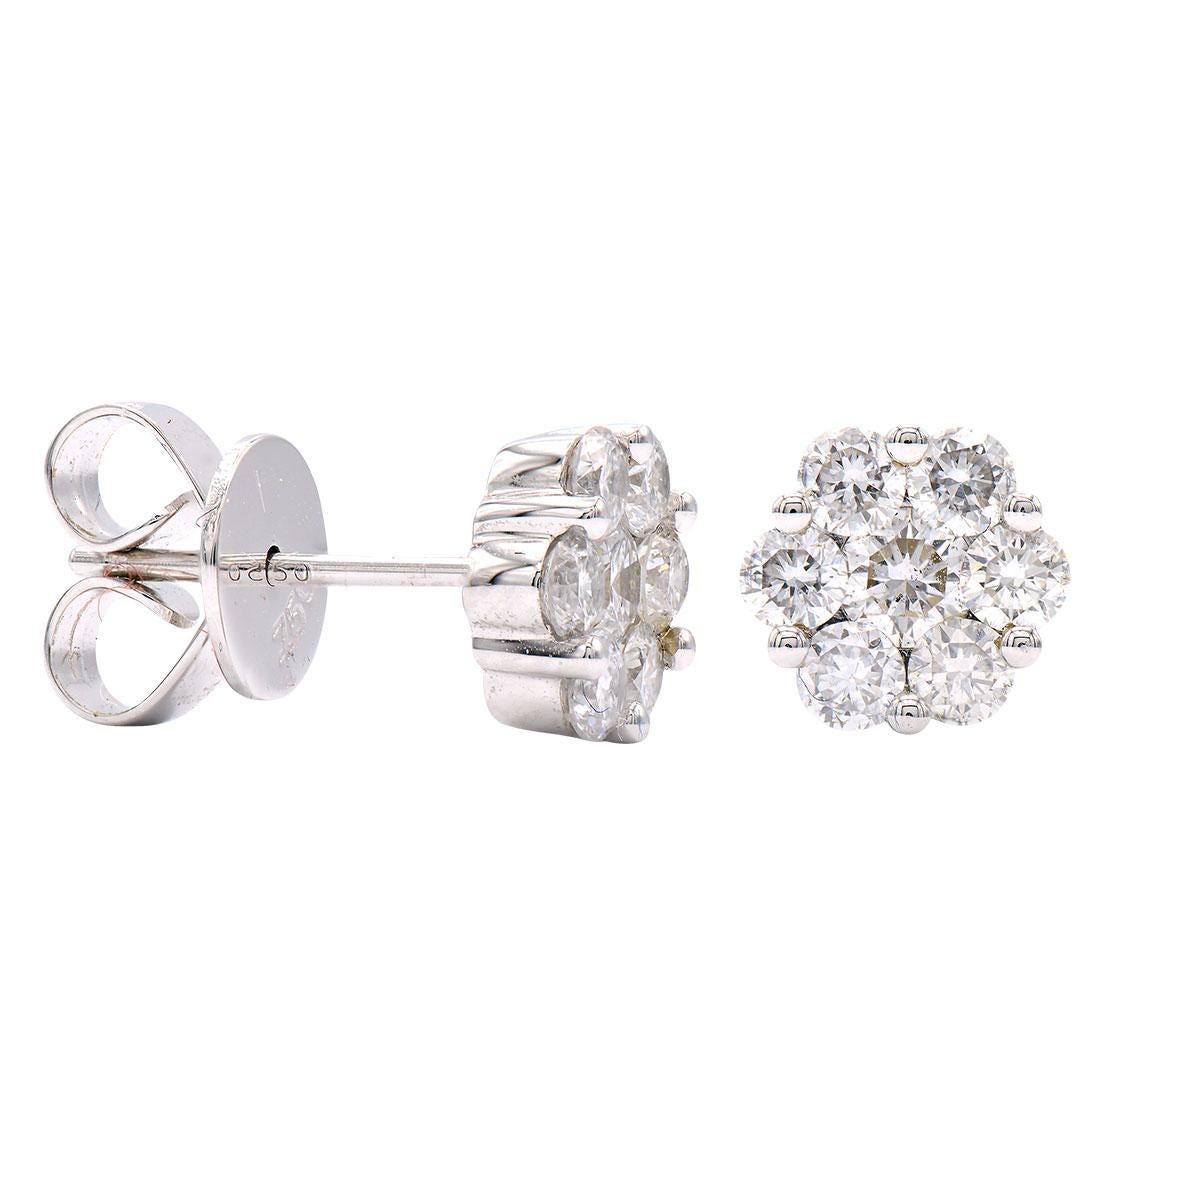 These stunning stud earrings are made with 1.4 grams of 14 karat white gold and contain 14 round diamonds. The diamonds are VS2, G color and have a total carat weight of .59 ct. These are stud earrings that have a push back with an extra notch for